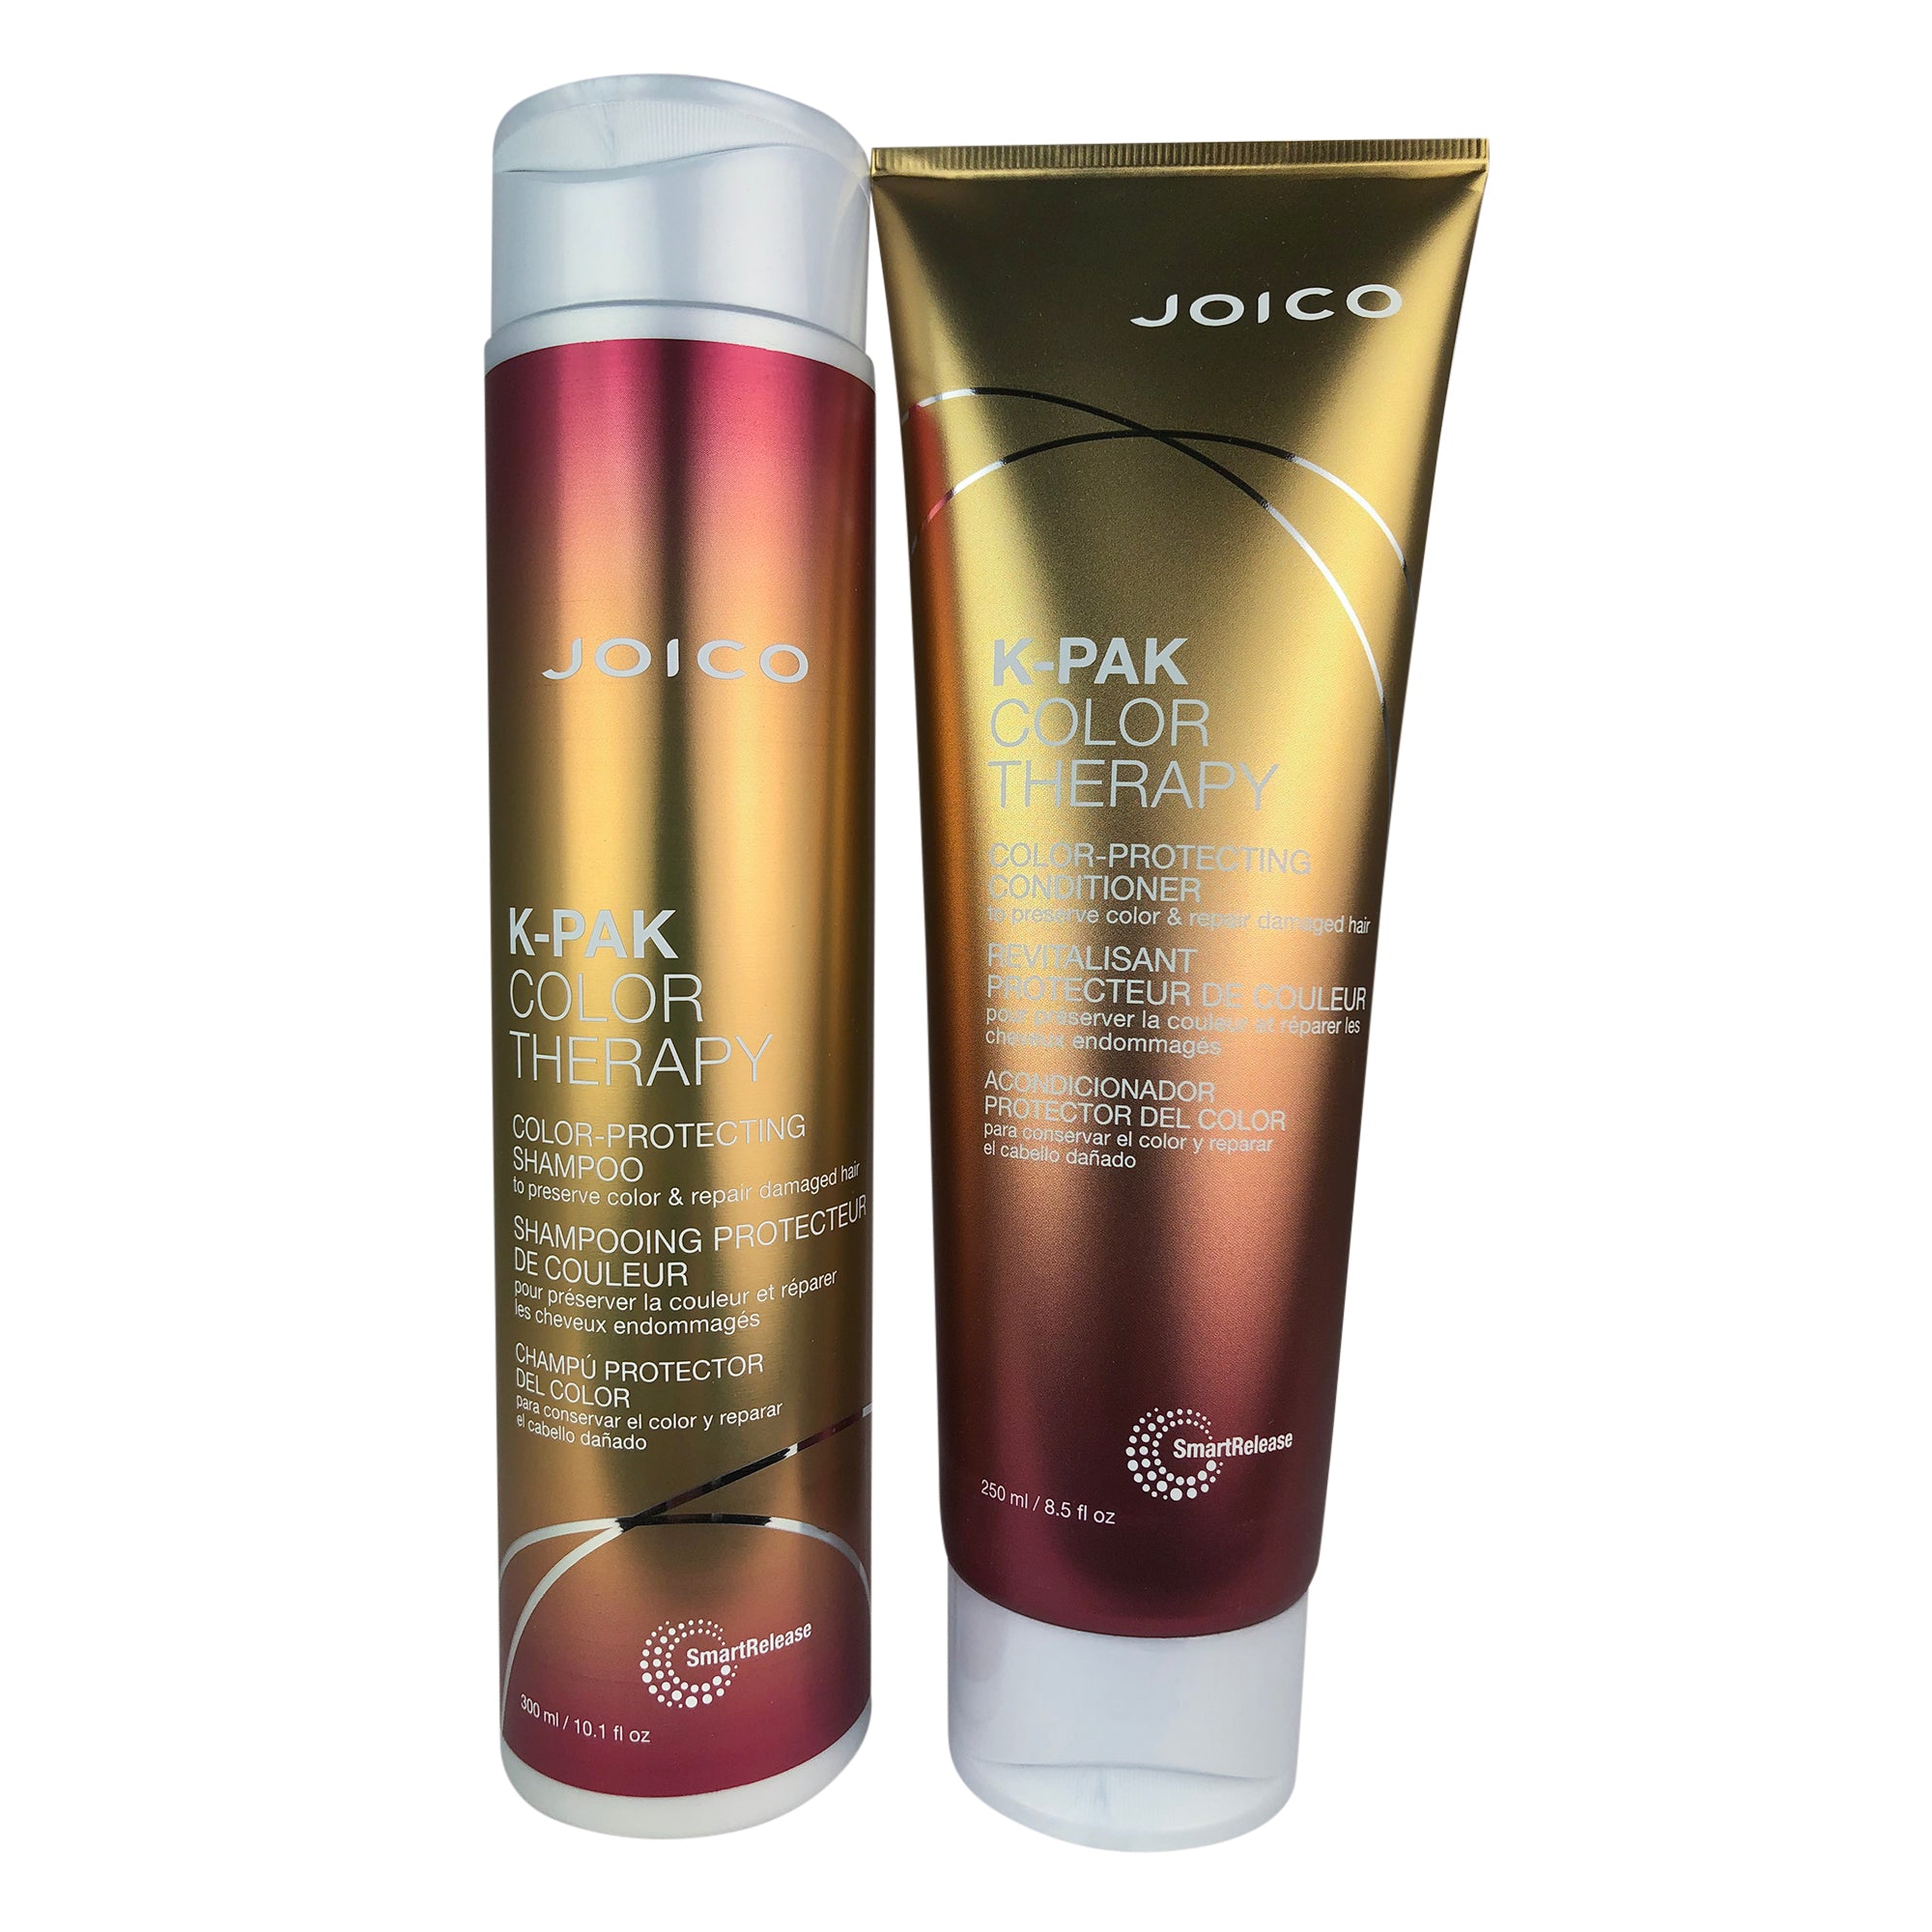 Joico K-Pak Color Therapy Duo (Color-Protecting Shampoo, Color-Protecting Conditioner)